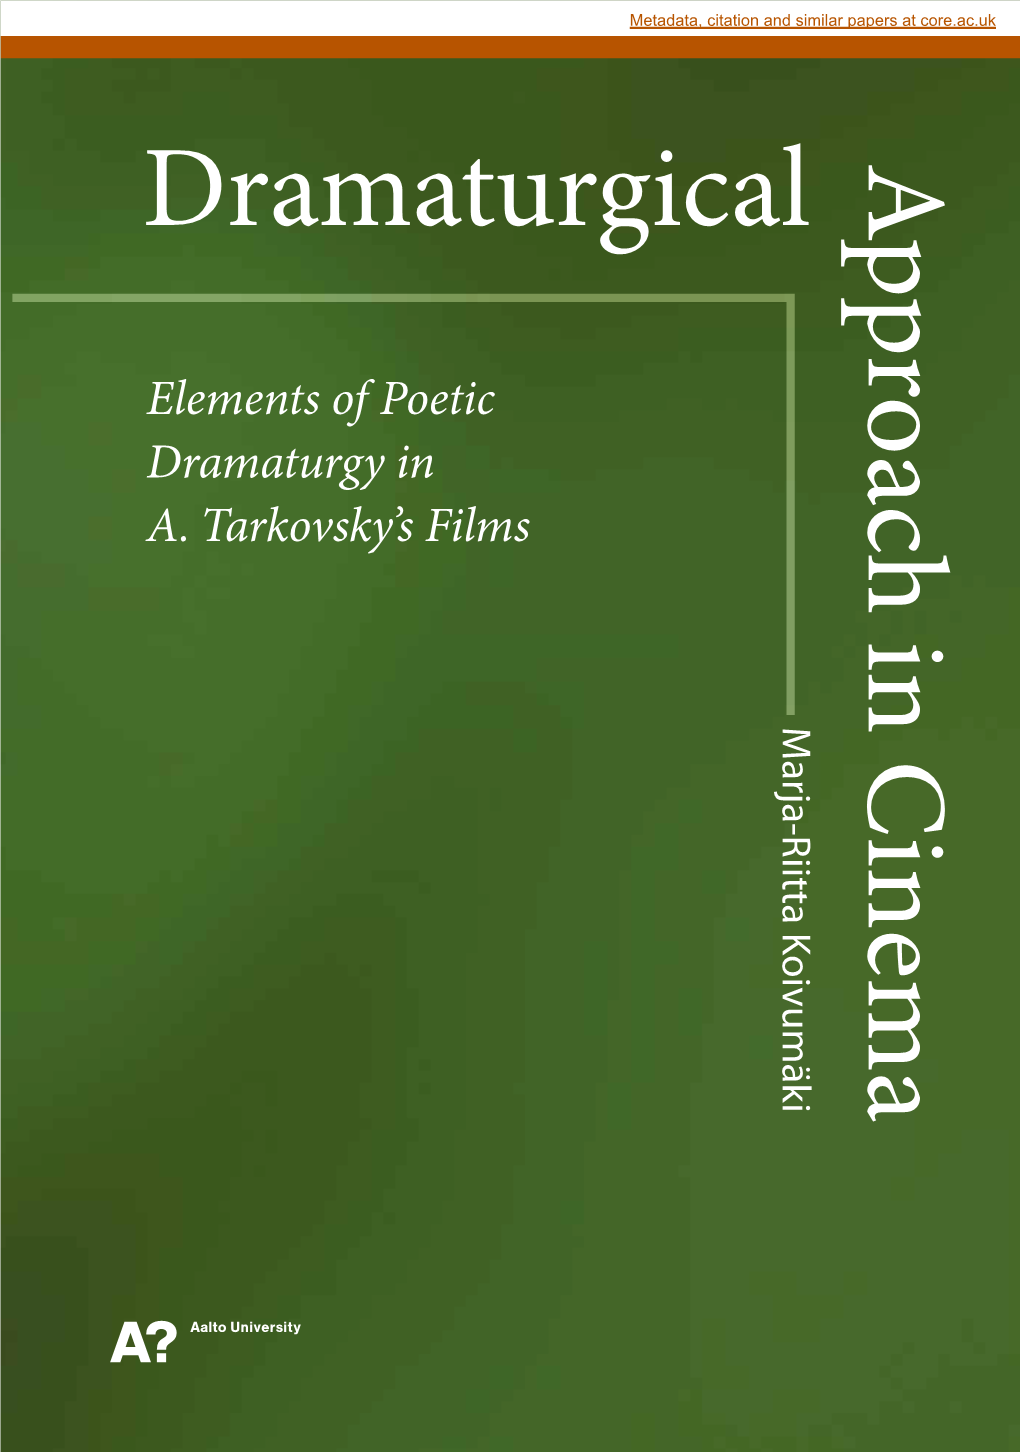 Dramaturgical Approach Cinema in Techniques in Film-Making